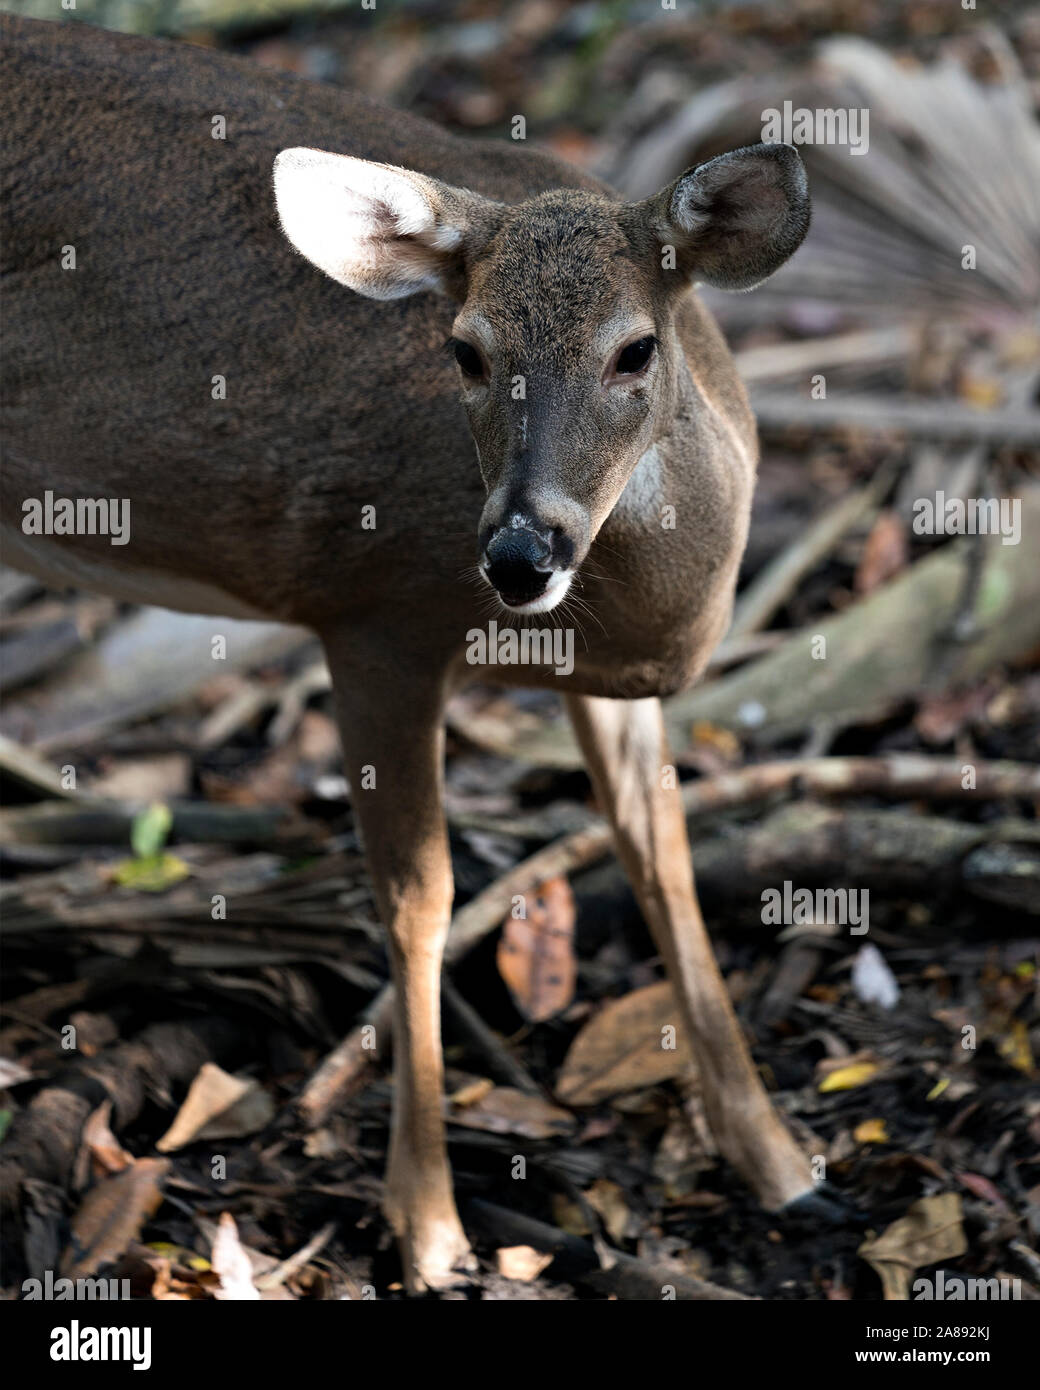 Deer (White-tailed deer) close-up view walking in the field exposing its  head, ears, eyes, nose, legs, in its environment and surrounding. Stock Photo